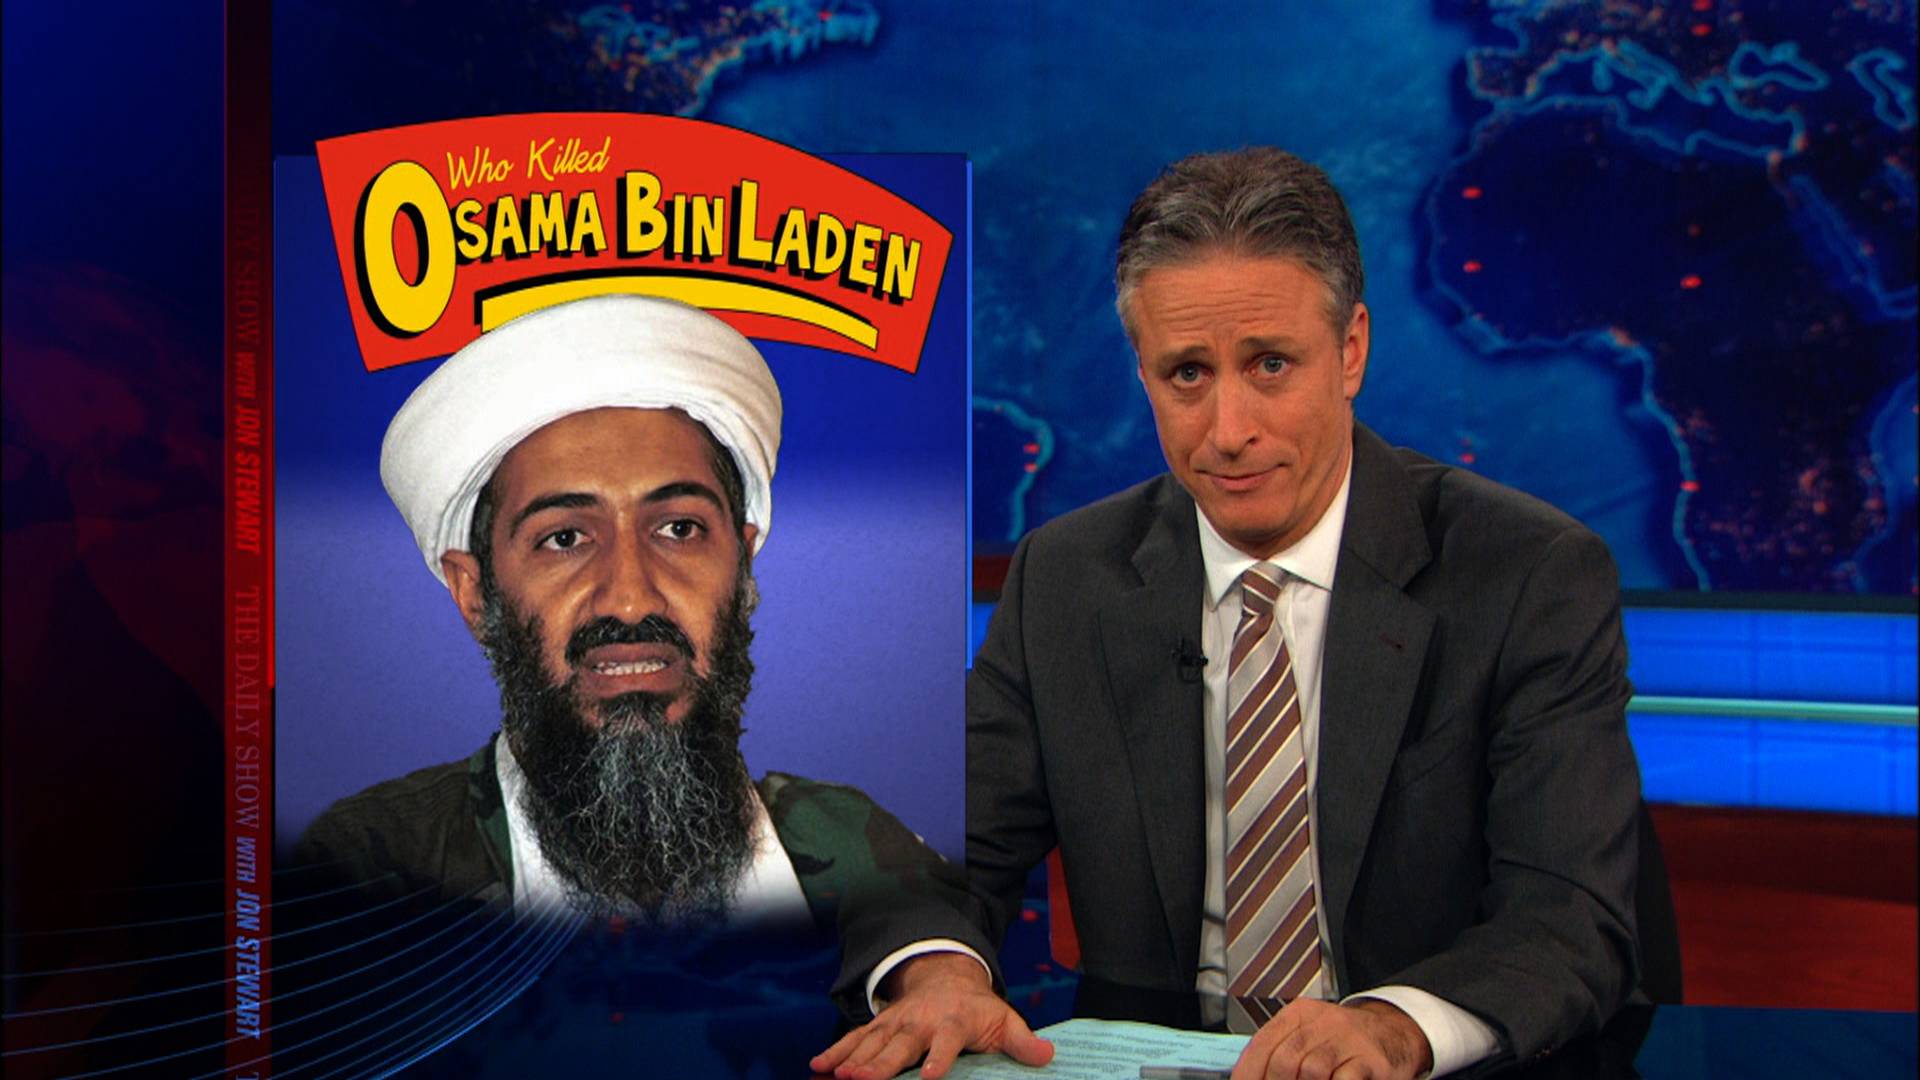 Who Killed Osama bin Laden? - The Daily Show with Jon Stewart (Video Clip)  | Comedy Central US